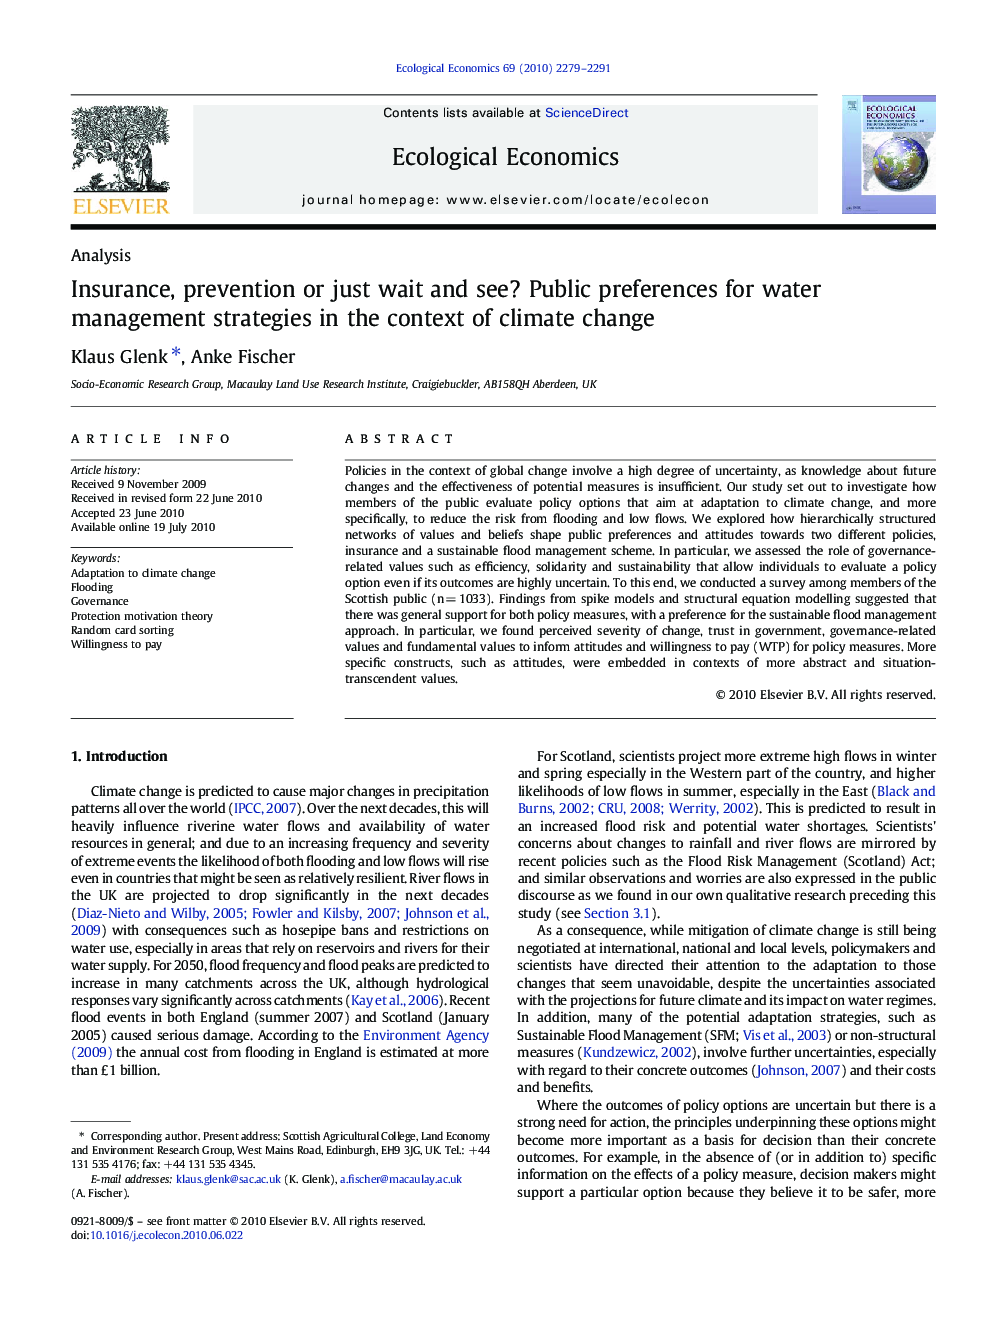 AnalysisInsurance, prevention or just wait and see? Public preferences for water management strategies in the context of climate change